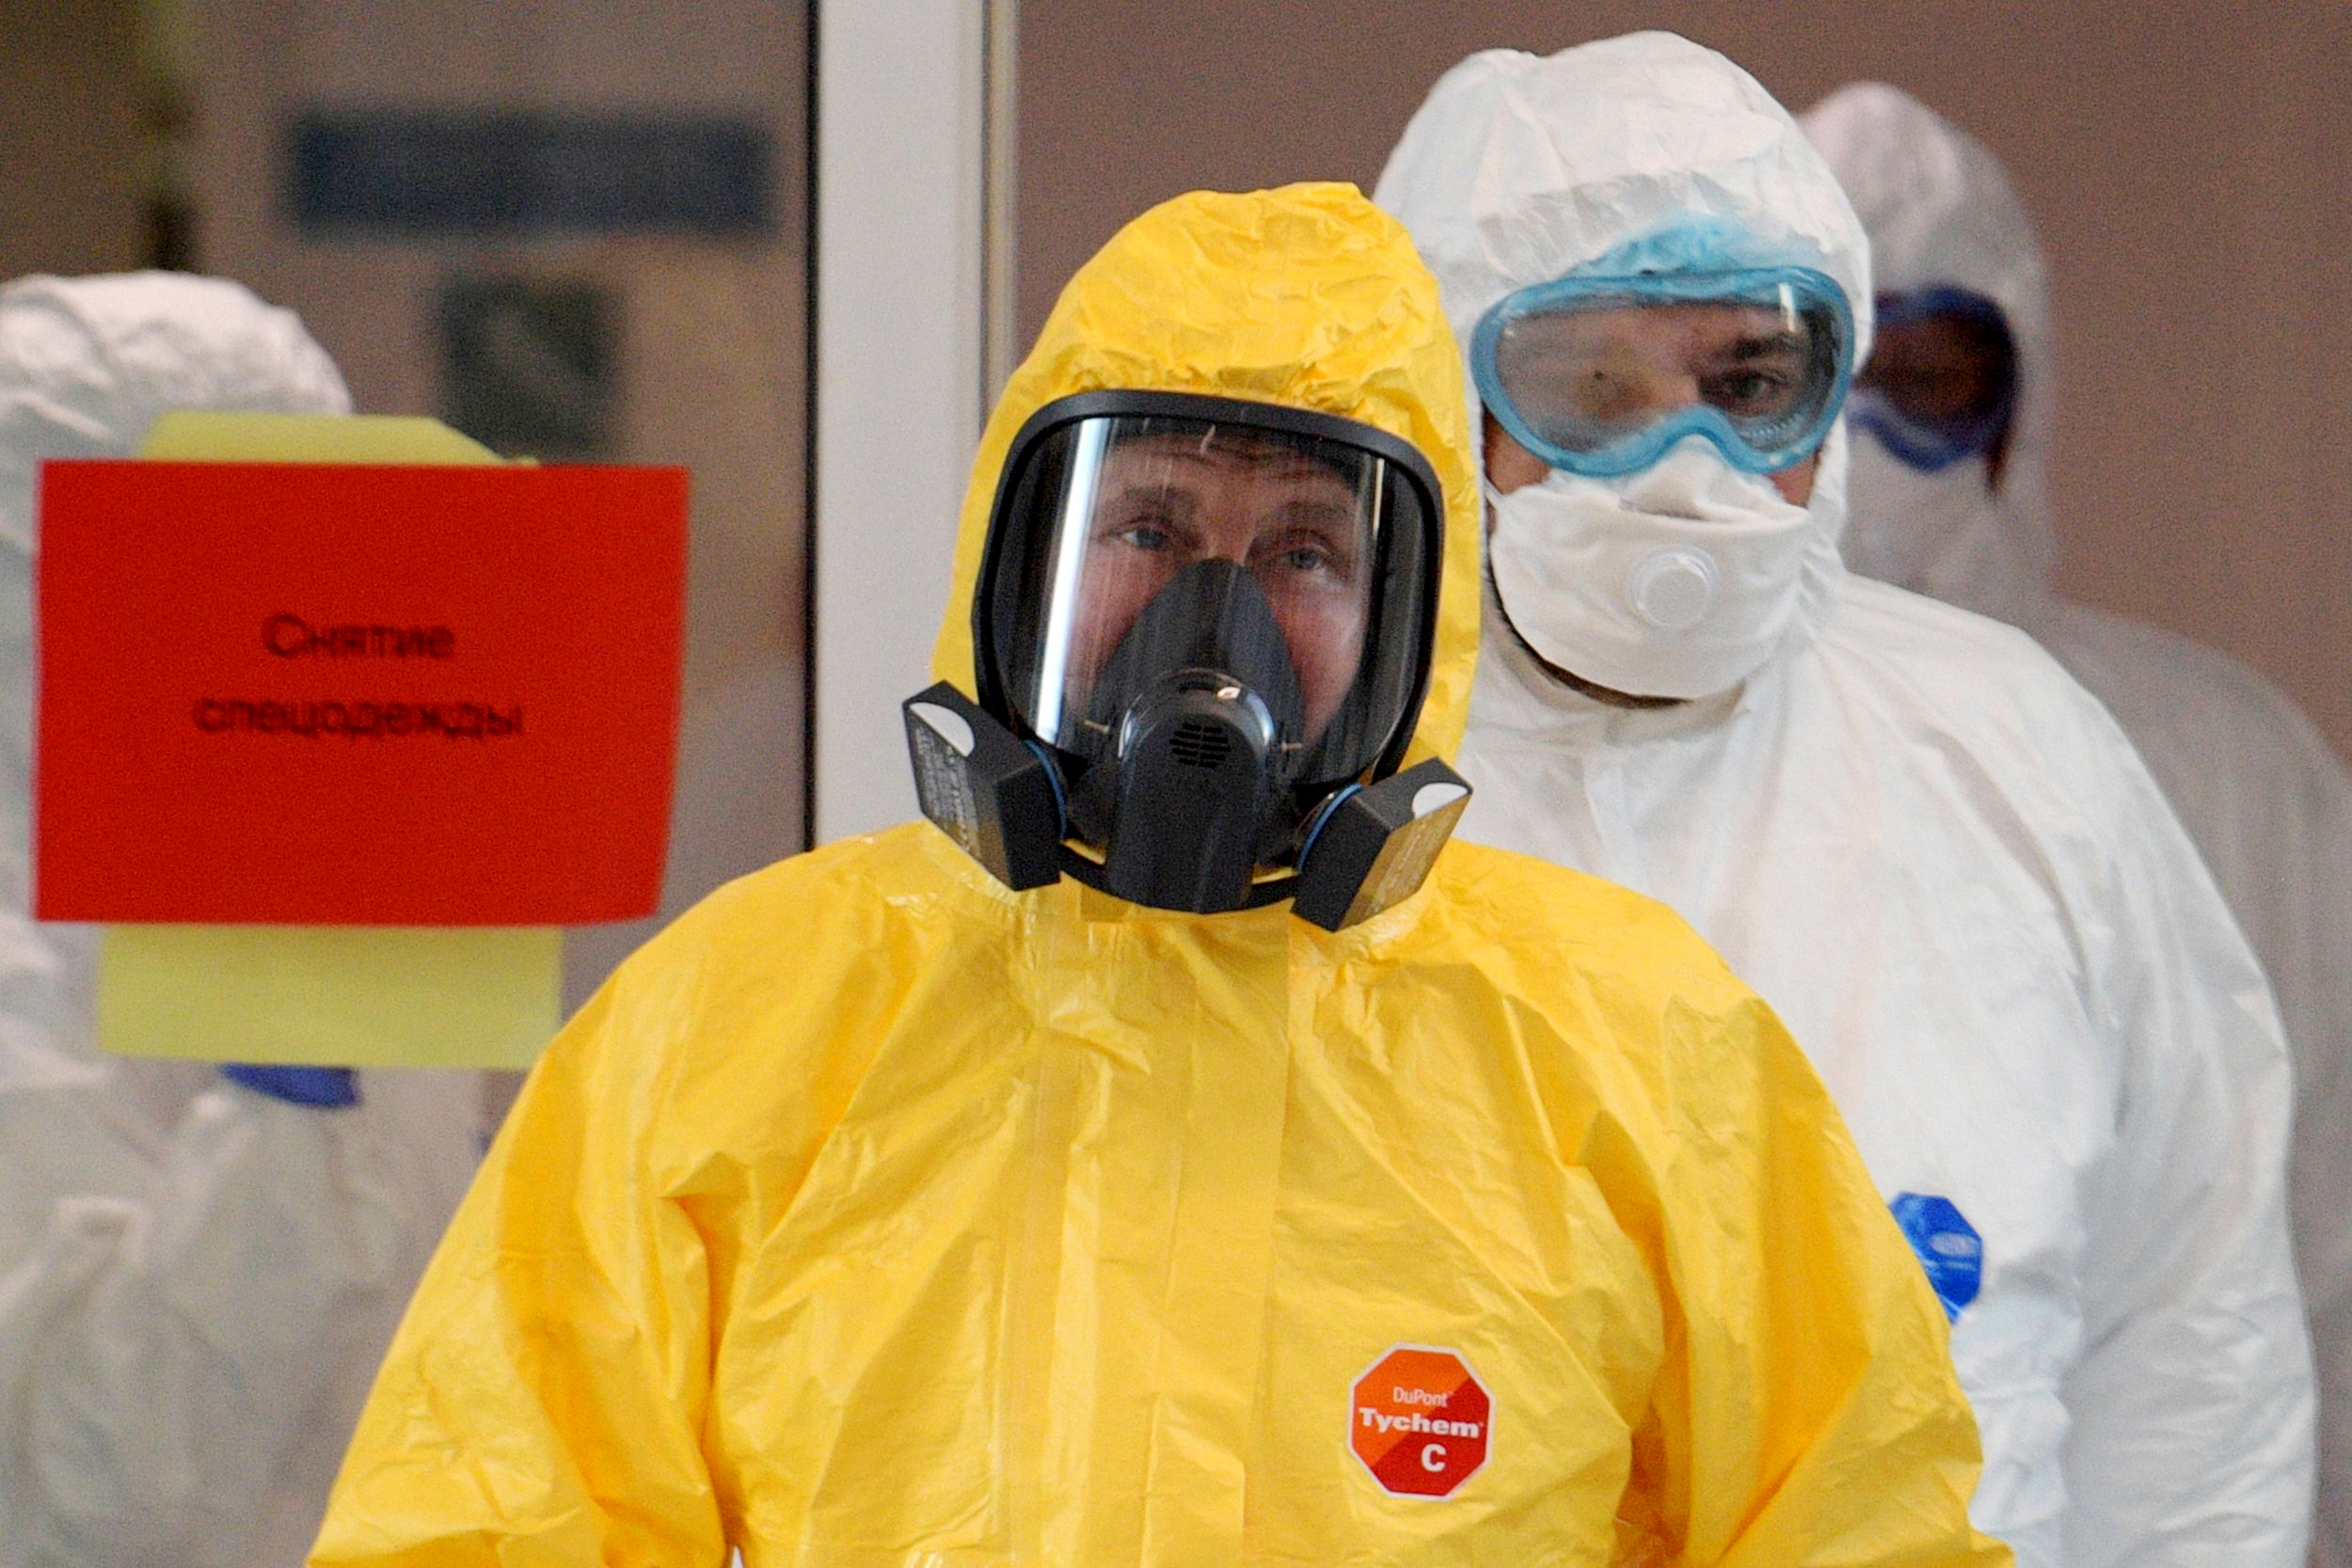 Putin dons hazmat suit, as Russia admits virus numbers likely far higher -  ABC News